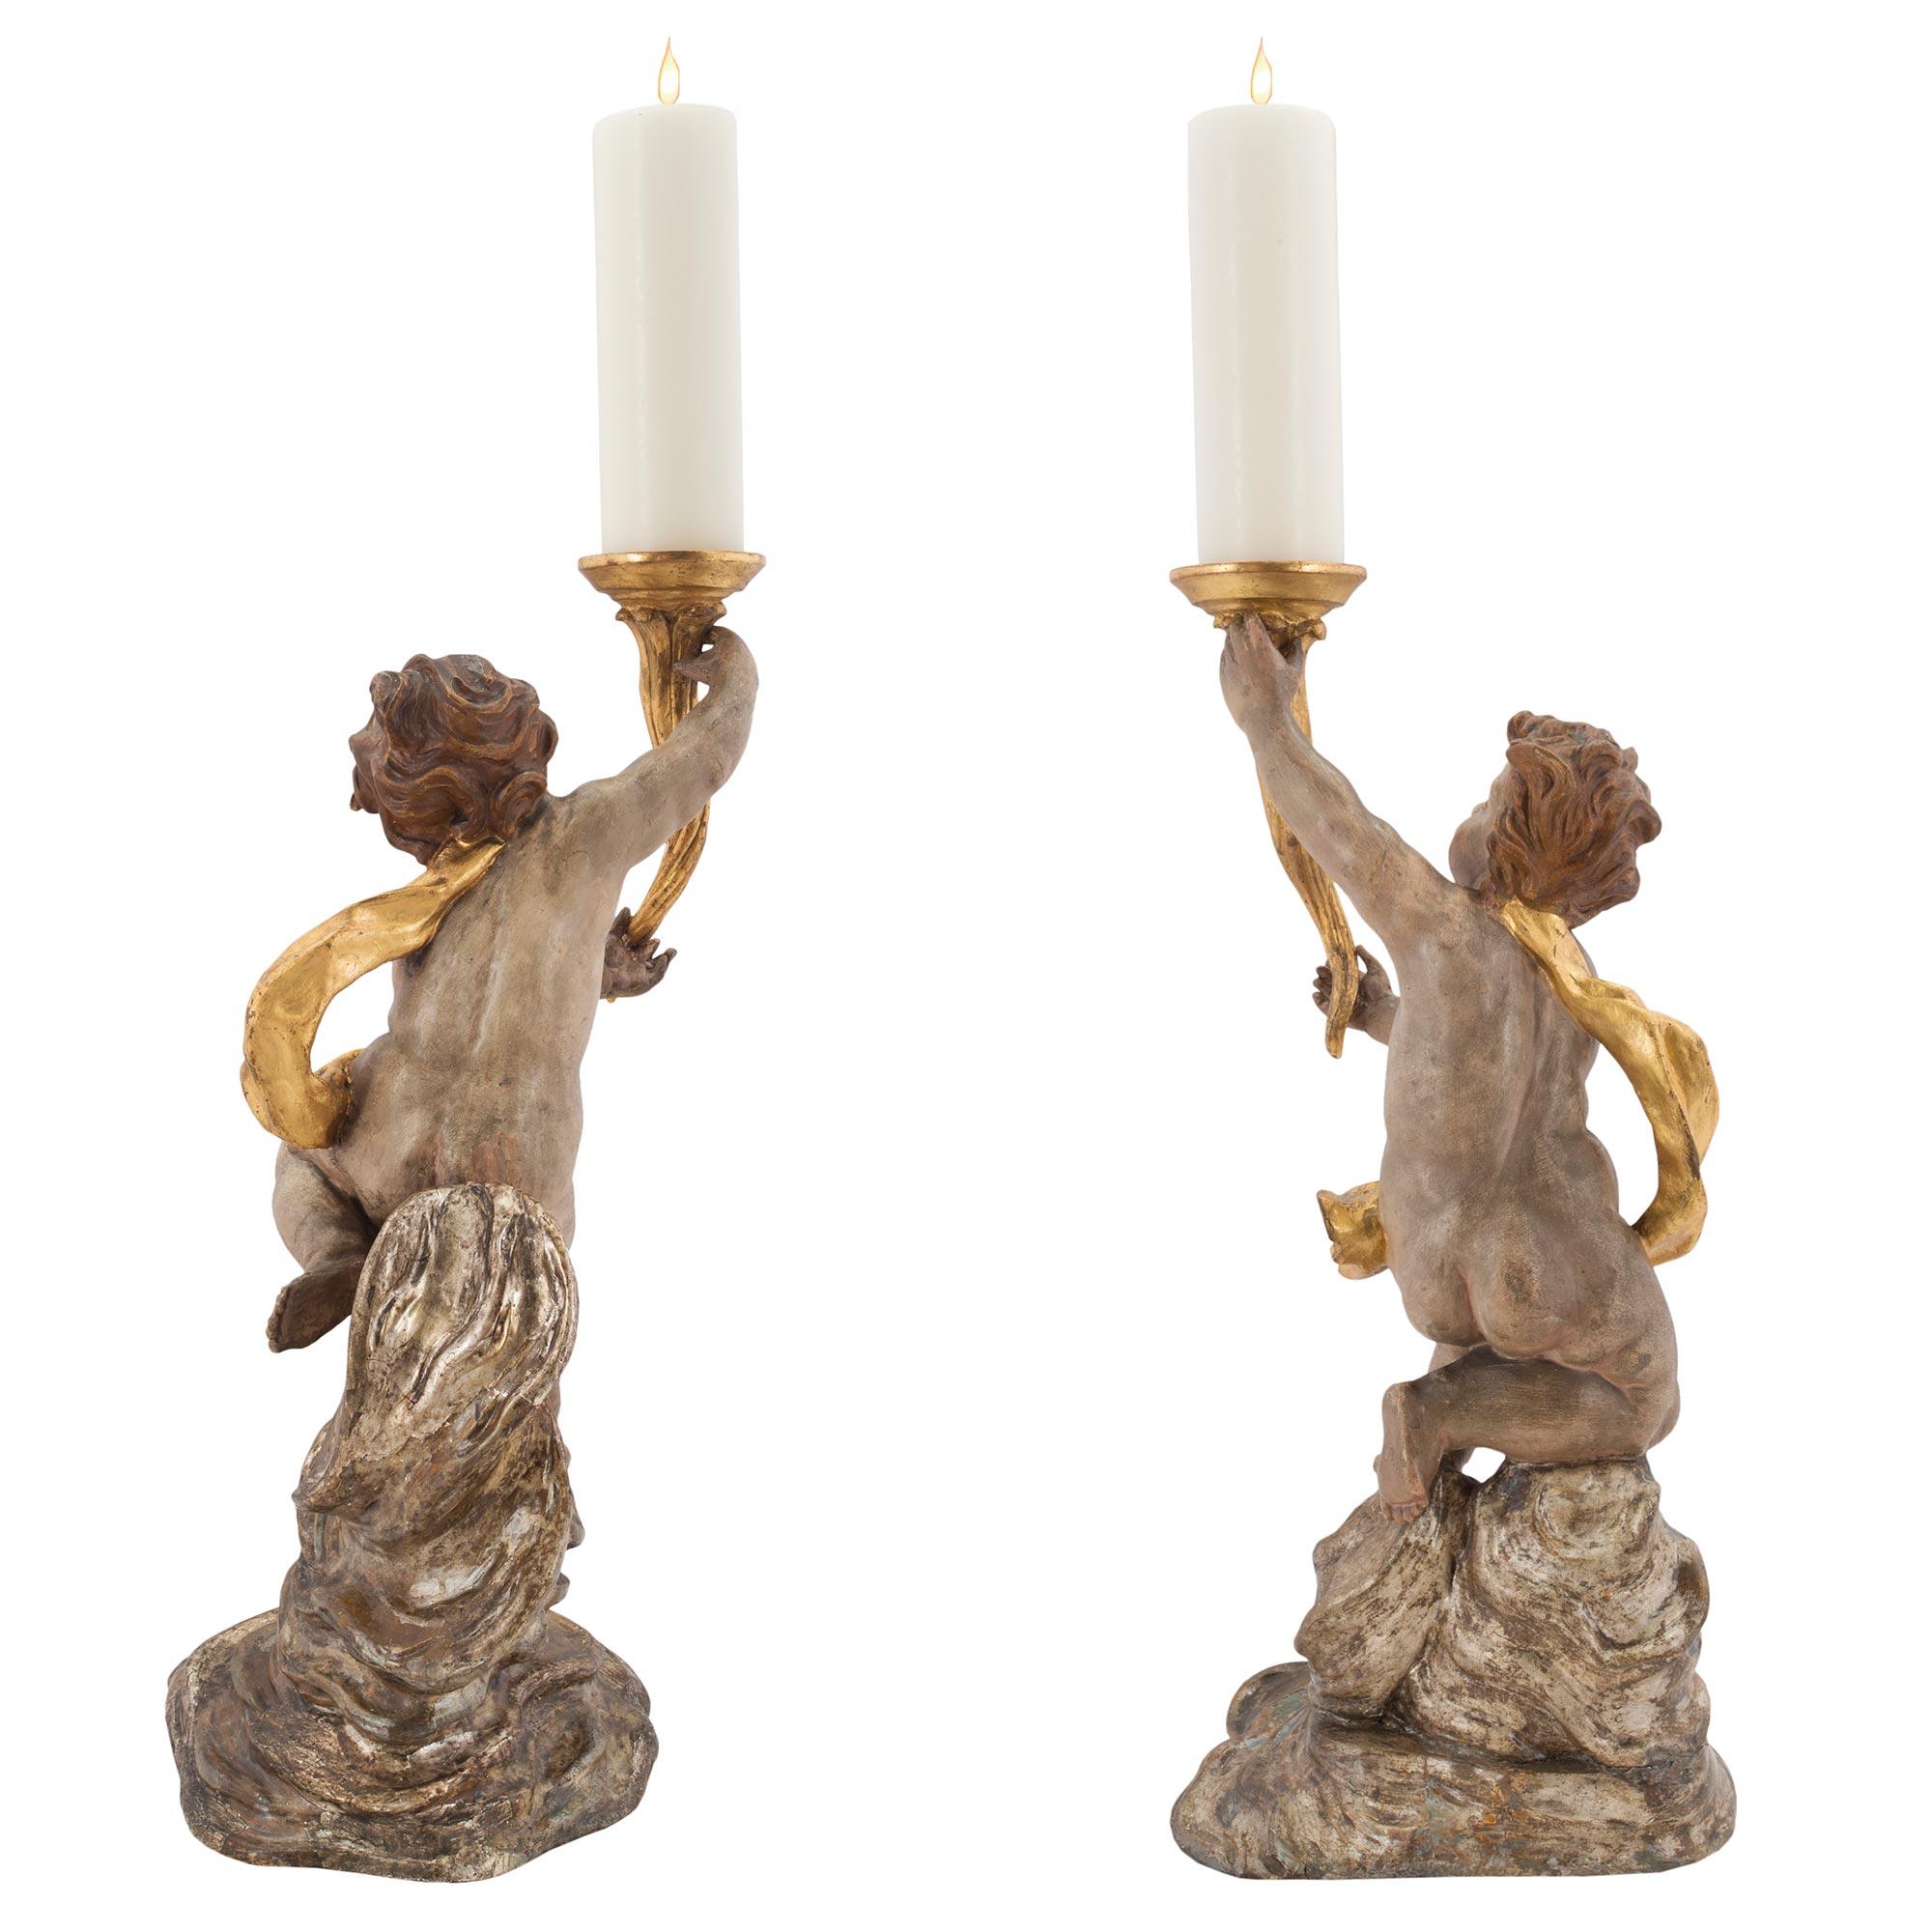 Pair of Stunning Italian Early 18th Century Candle Stands from Northern Italy 2